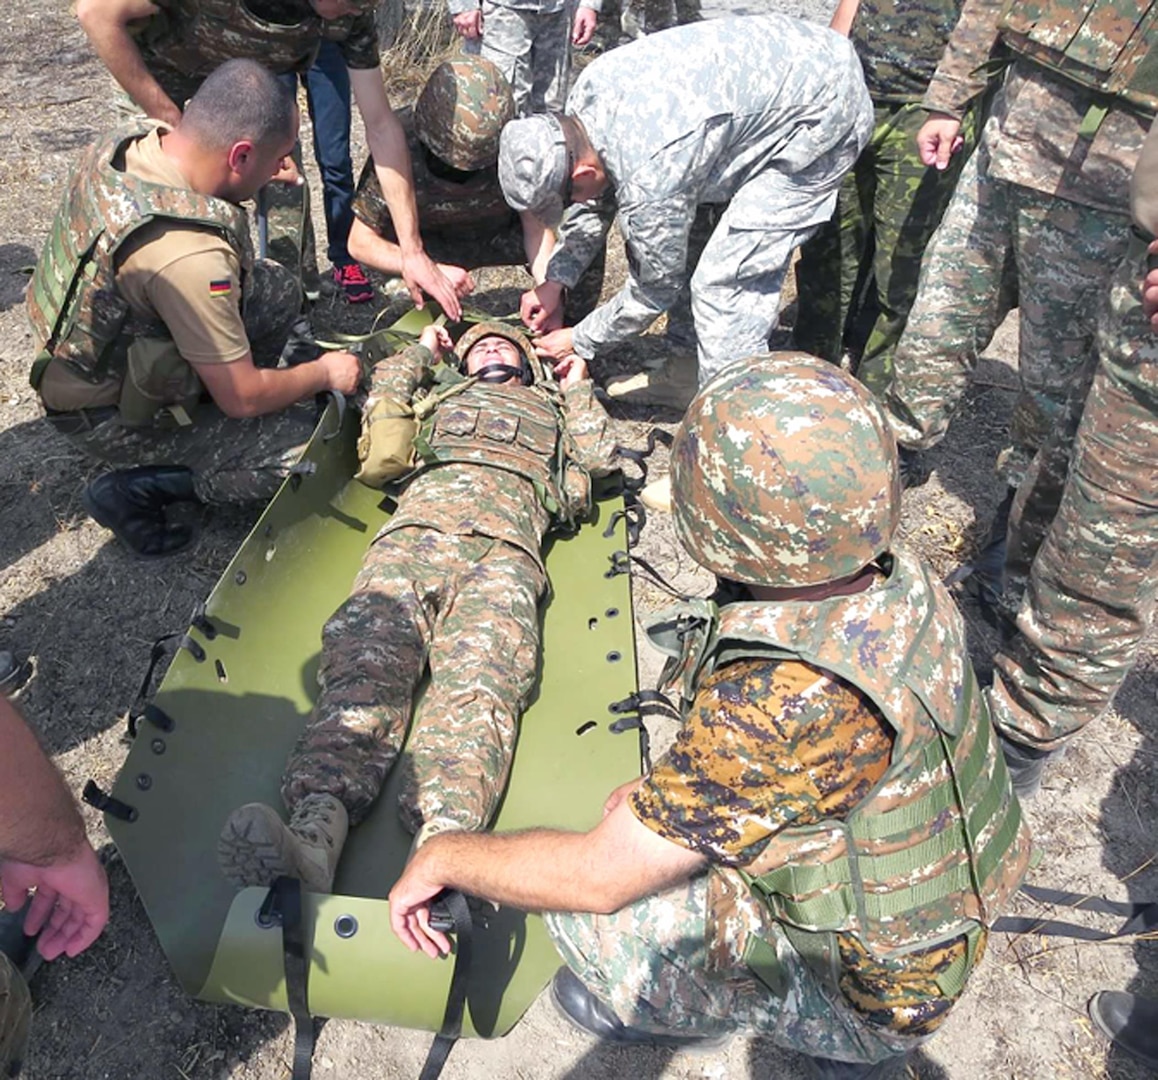 Sgt. 1st Class Victor Miranda, from the 232nd Medical Battalion at Fort Sam Houston, trains Armenian students on the Sked Basic Rescue System. Miranda and four other medic instructors traveled to Armenia to provide U.S. Army’s 68W, Health Care Specialist, training to 12 Armenian medics. After medic training, these newly qualified Armenian medics completed a modified Army Basic Instructor Course which certified them as the initial instructors for the newly formed Armenian Combat Medic School in Yerevan, a first of its kind for the Armenian Armed Forces.